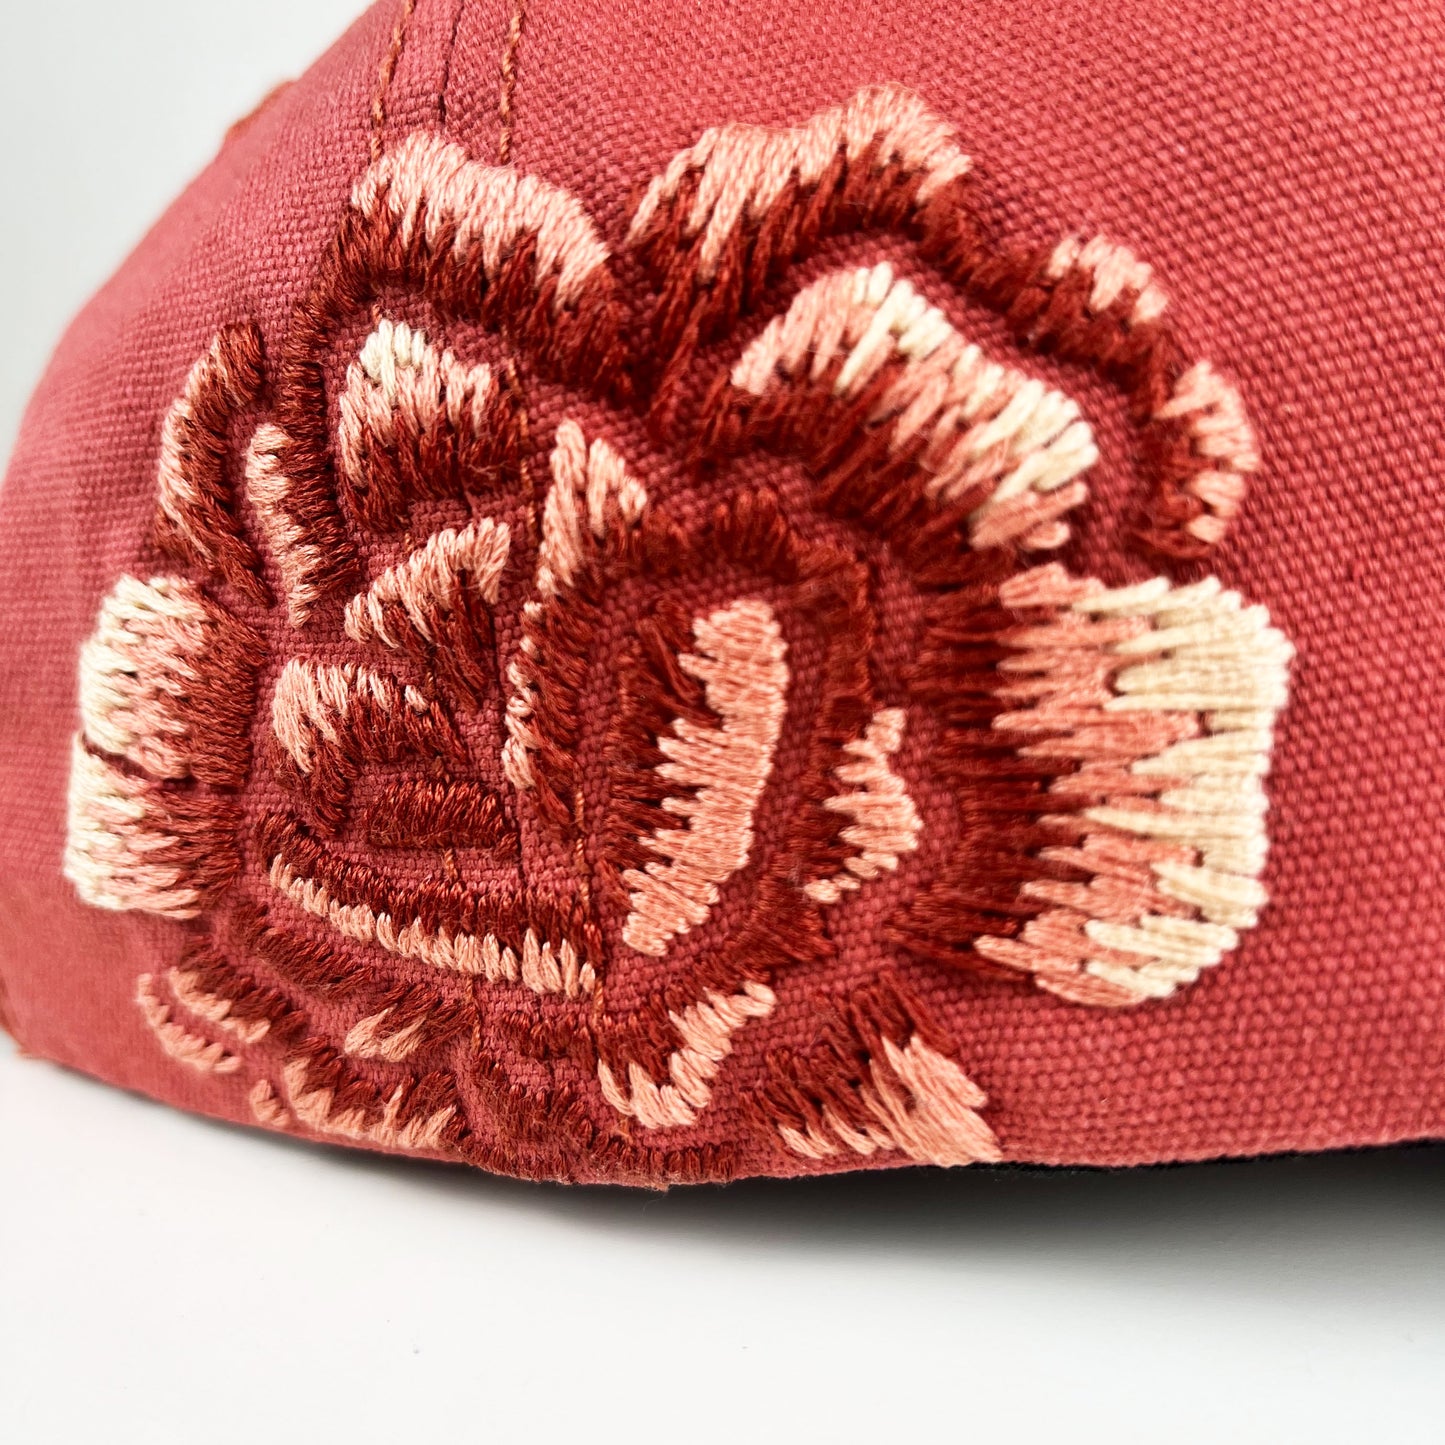 very close up view of hand embroidered peony in shades of terra cotta